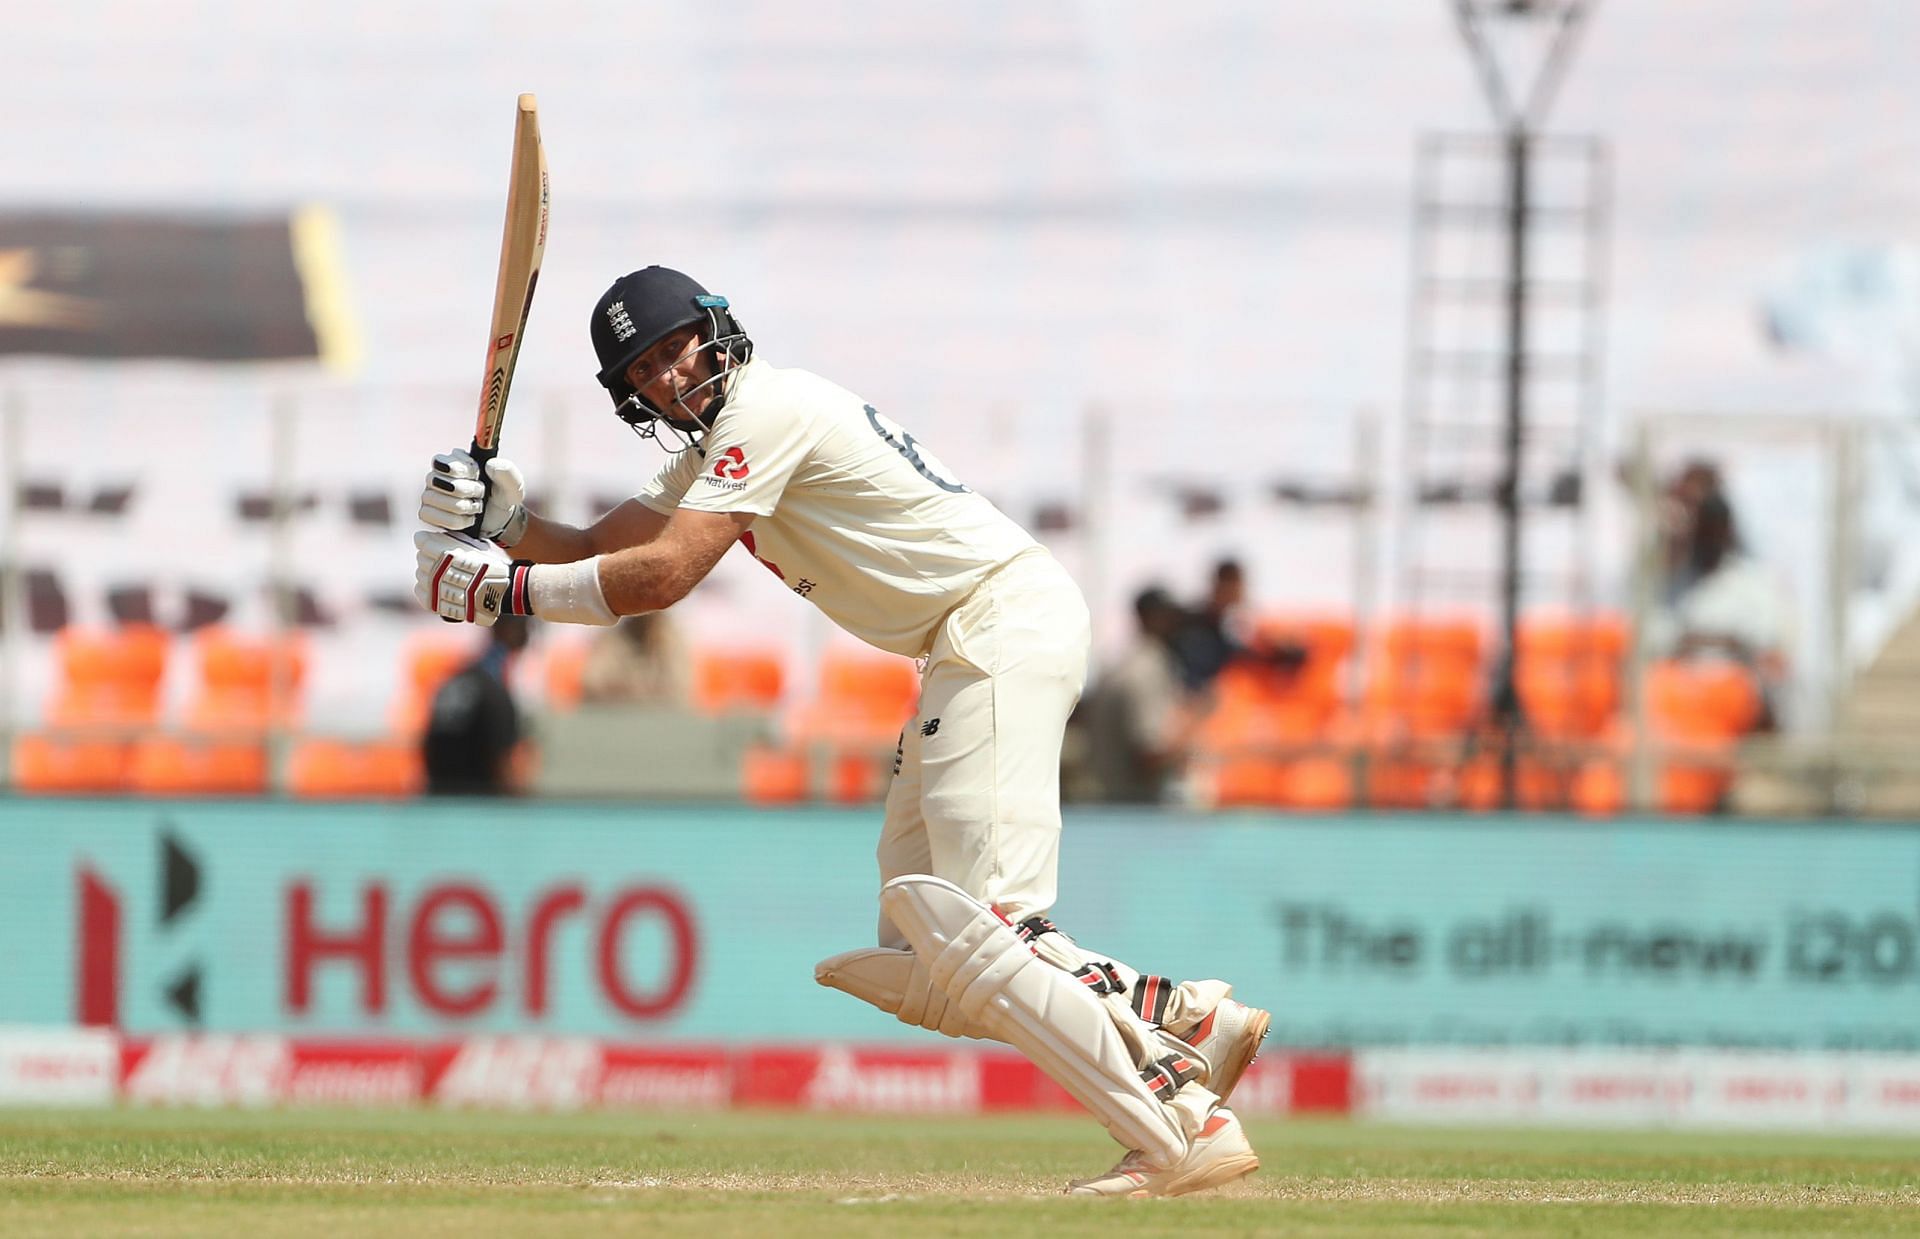 Joe Root scored a terrific double-ton in Chennai. (Pic: Getty Images)